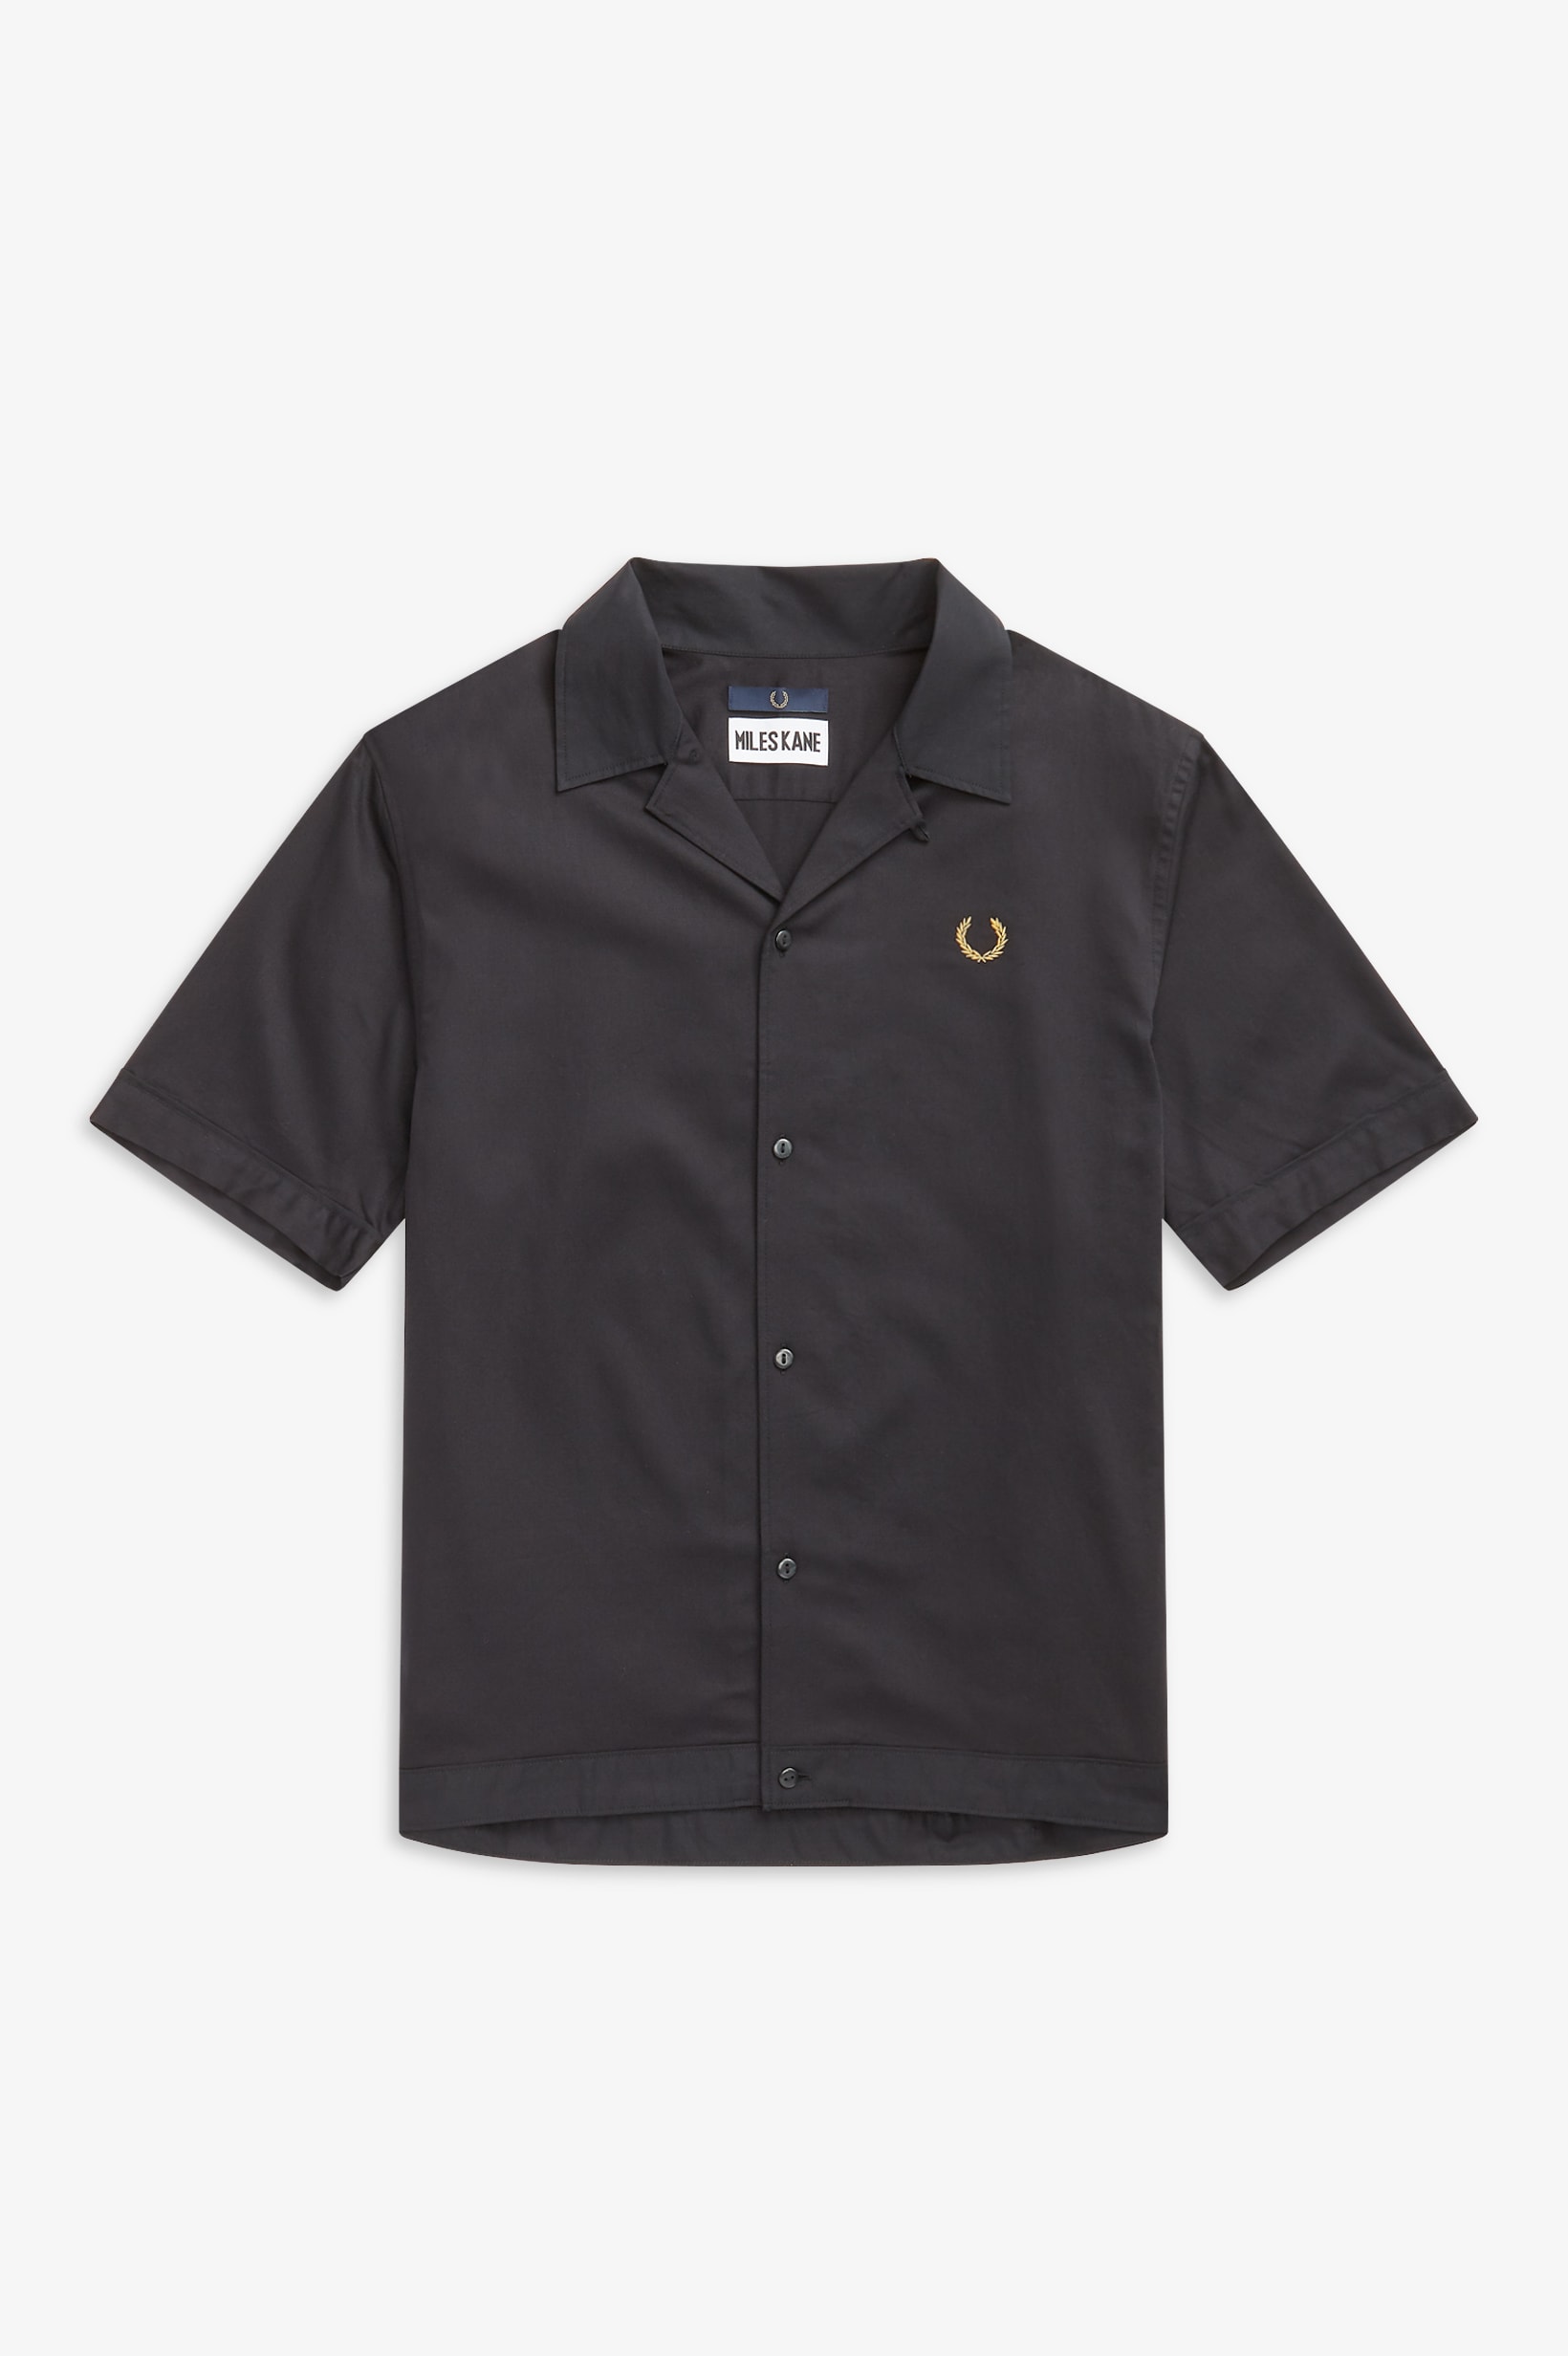 fred-perry-miles-kane-19-8